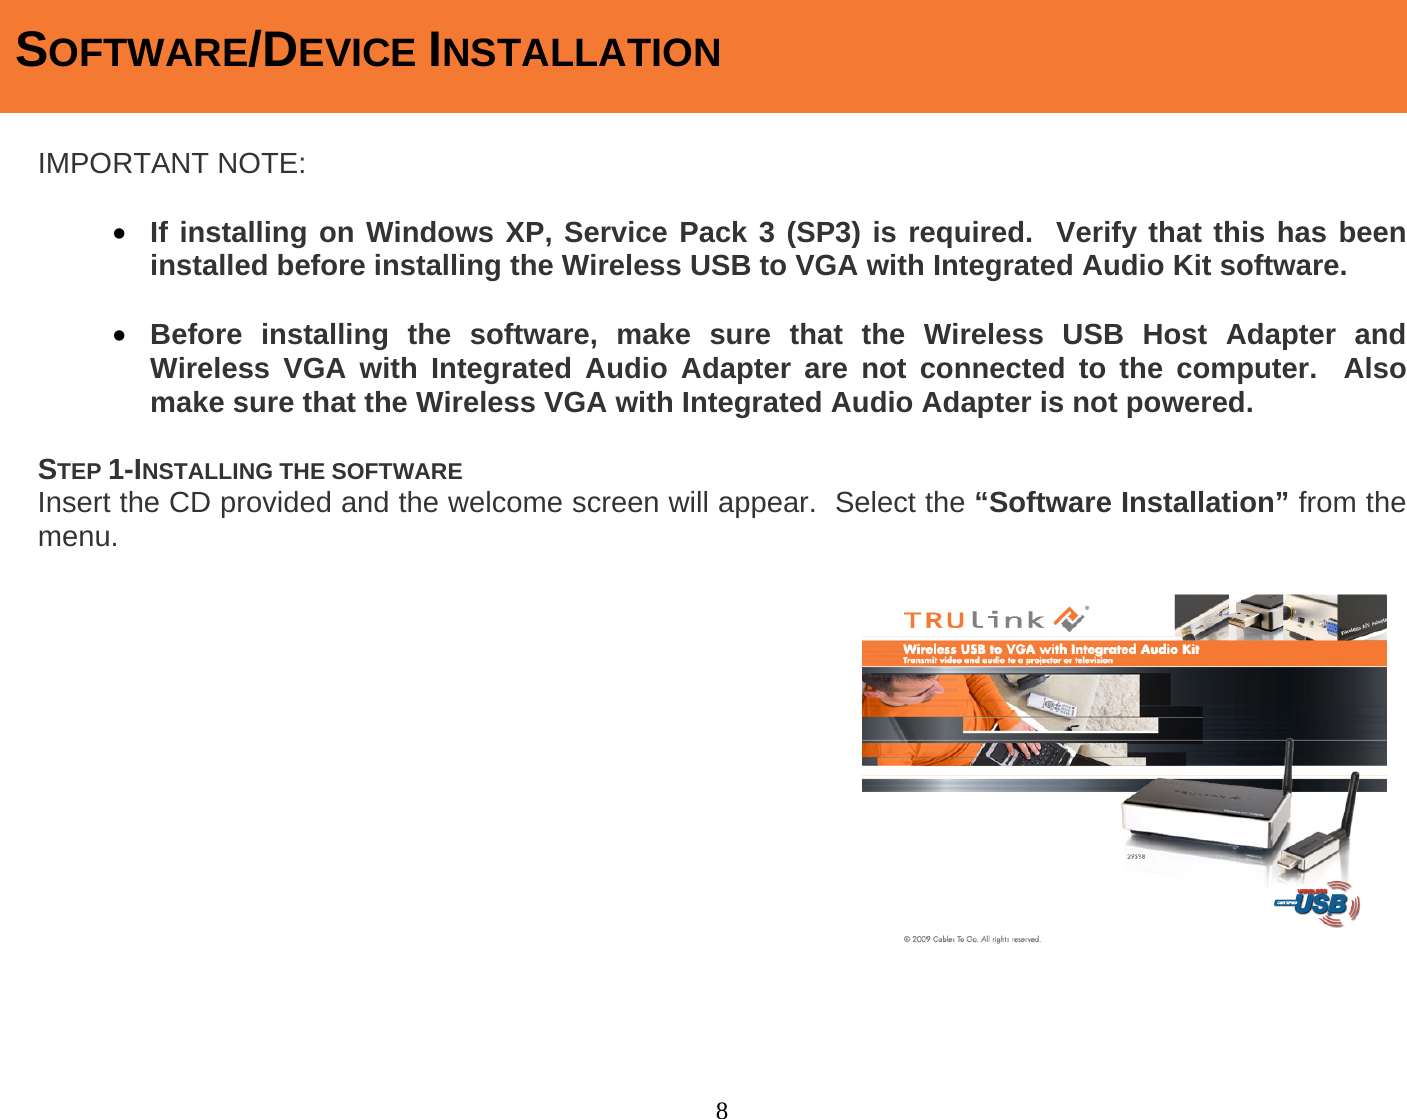 8  IMPORTANT NOTE:  • If installing on Windows XP, Service Pack 3 (SP3) is required.  Verify that this has been installed before installing the Wireless USB to VGA with Integrated Audio Kit software.  • Before installing the software, make sure that the Wireless USB Host Adapter and Wireless VGA with Integrated Audio Adapter are not connected to the computer.  Also make sure that the Wireless VGA with Integrated Audio Adapter is not powered.  STEP 1-INSTALLING THE SOFTWARE Insert the CD provided and the welcome screen will appear.  Select the “Software Installation” from the menu.                    SOFTWARE/DEVICE INSTALLATION 